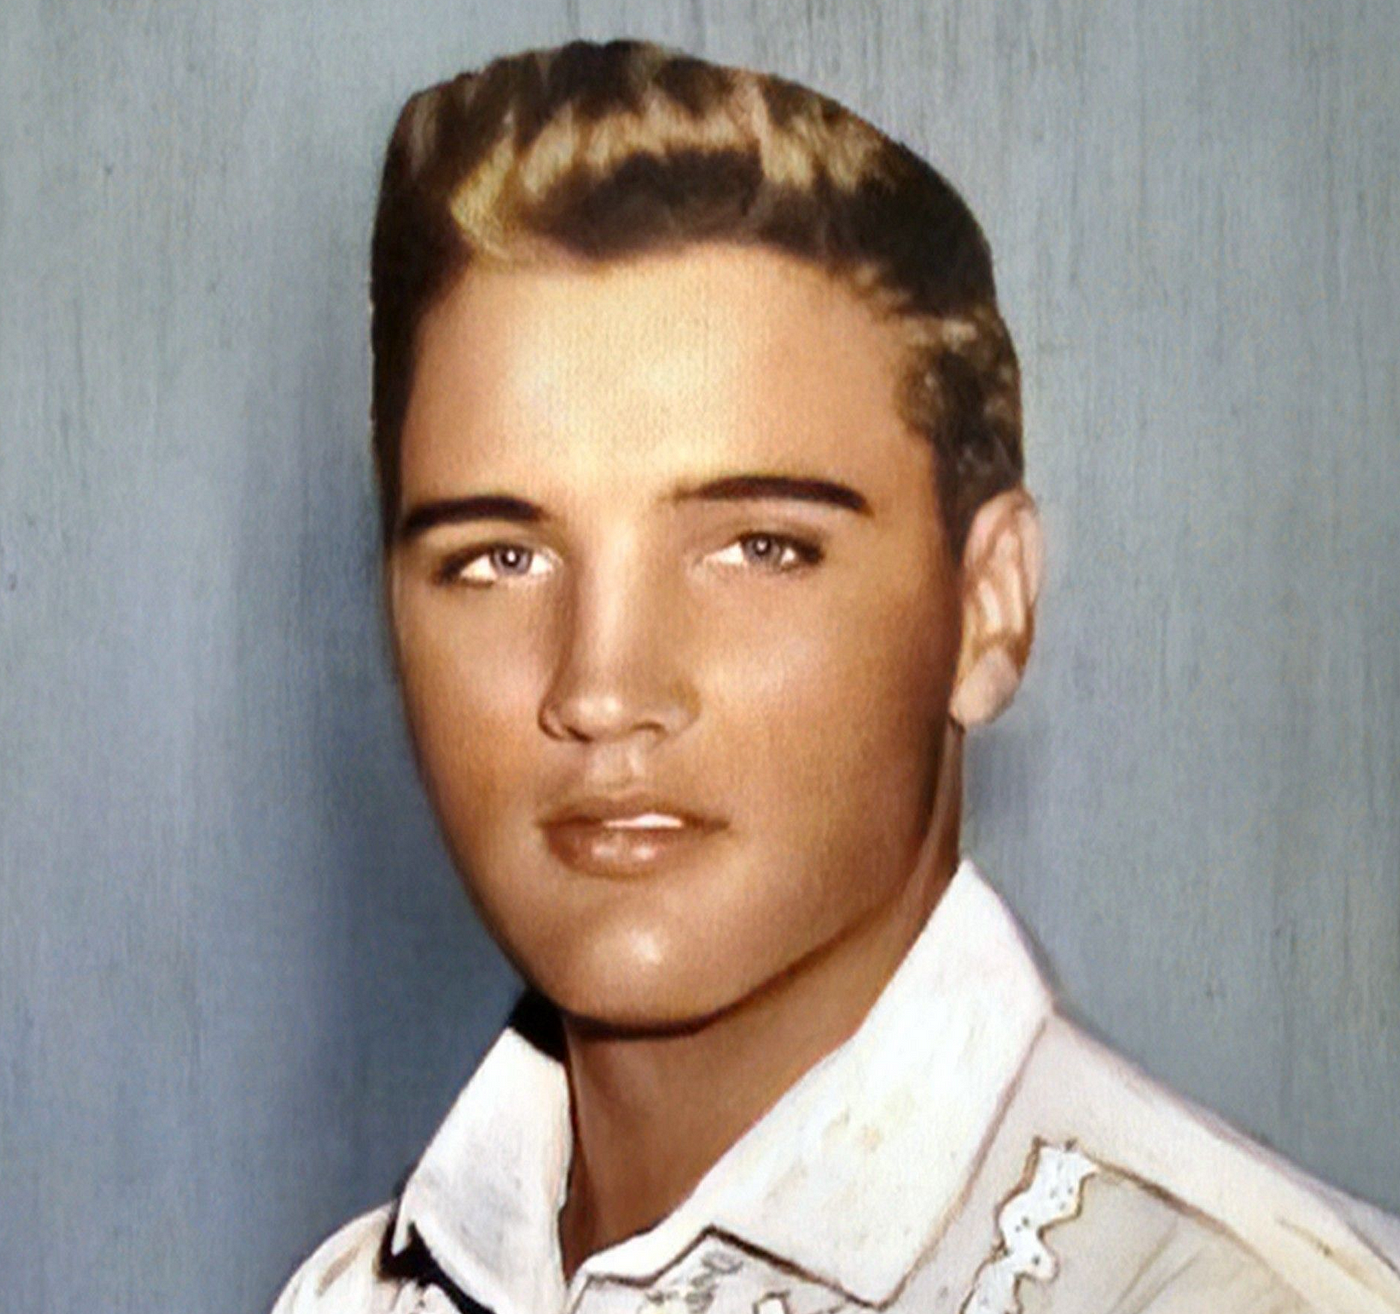 The sexuality of Elvis Presley